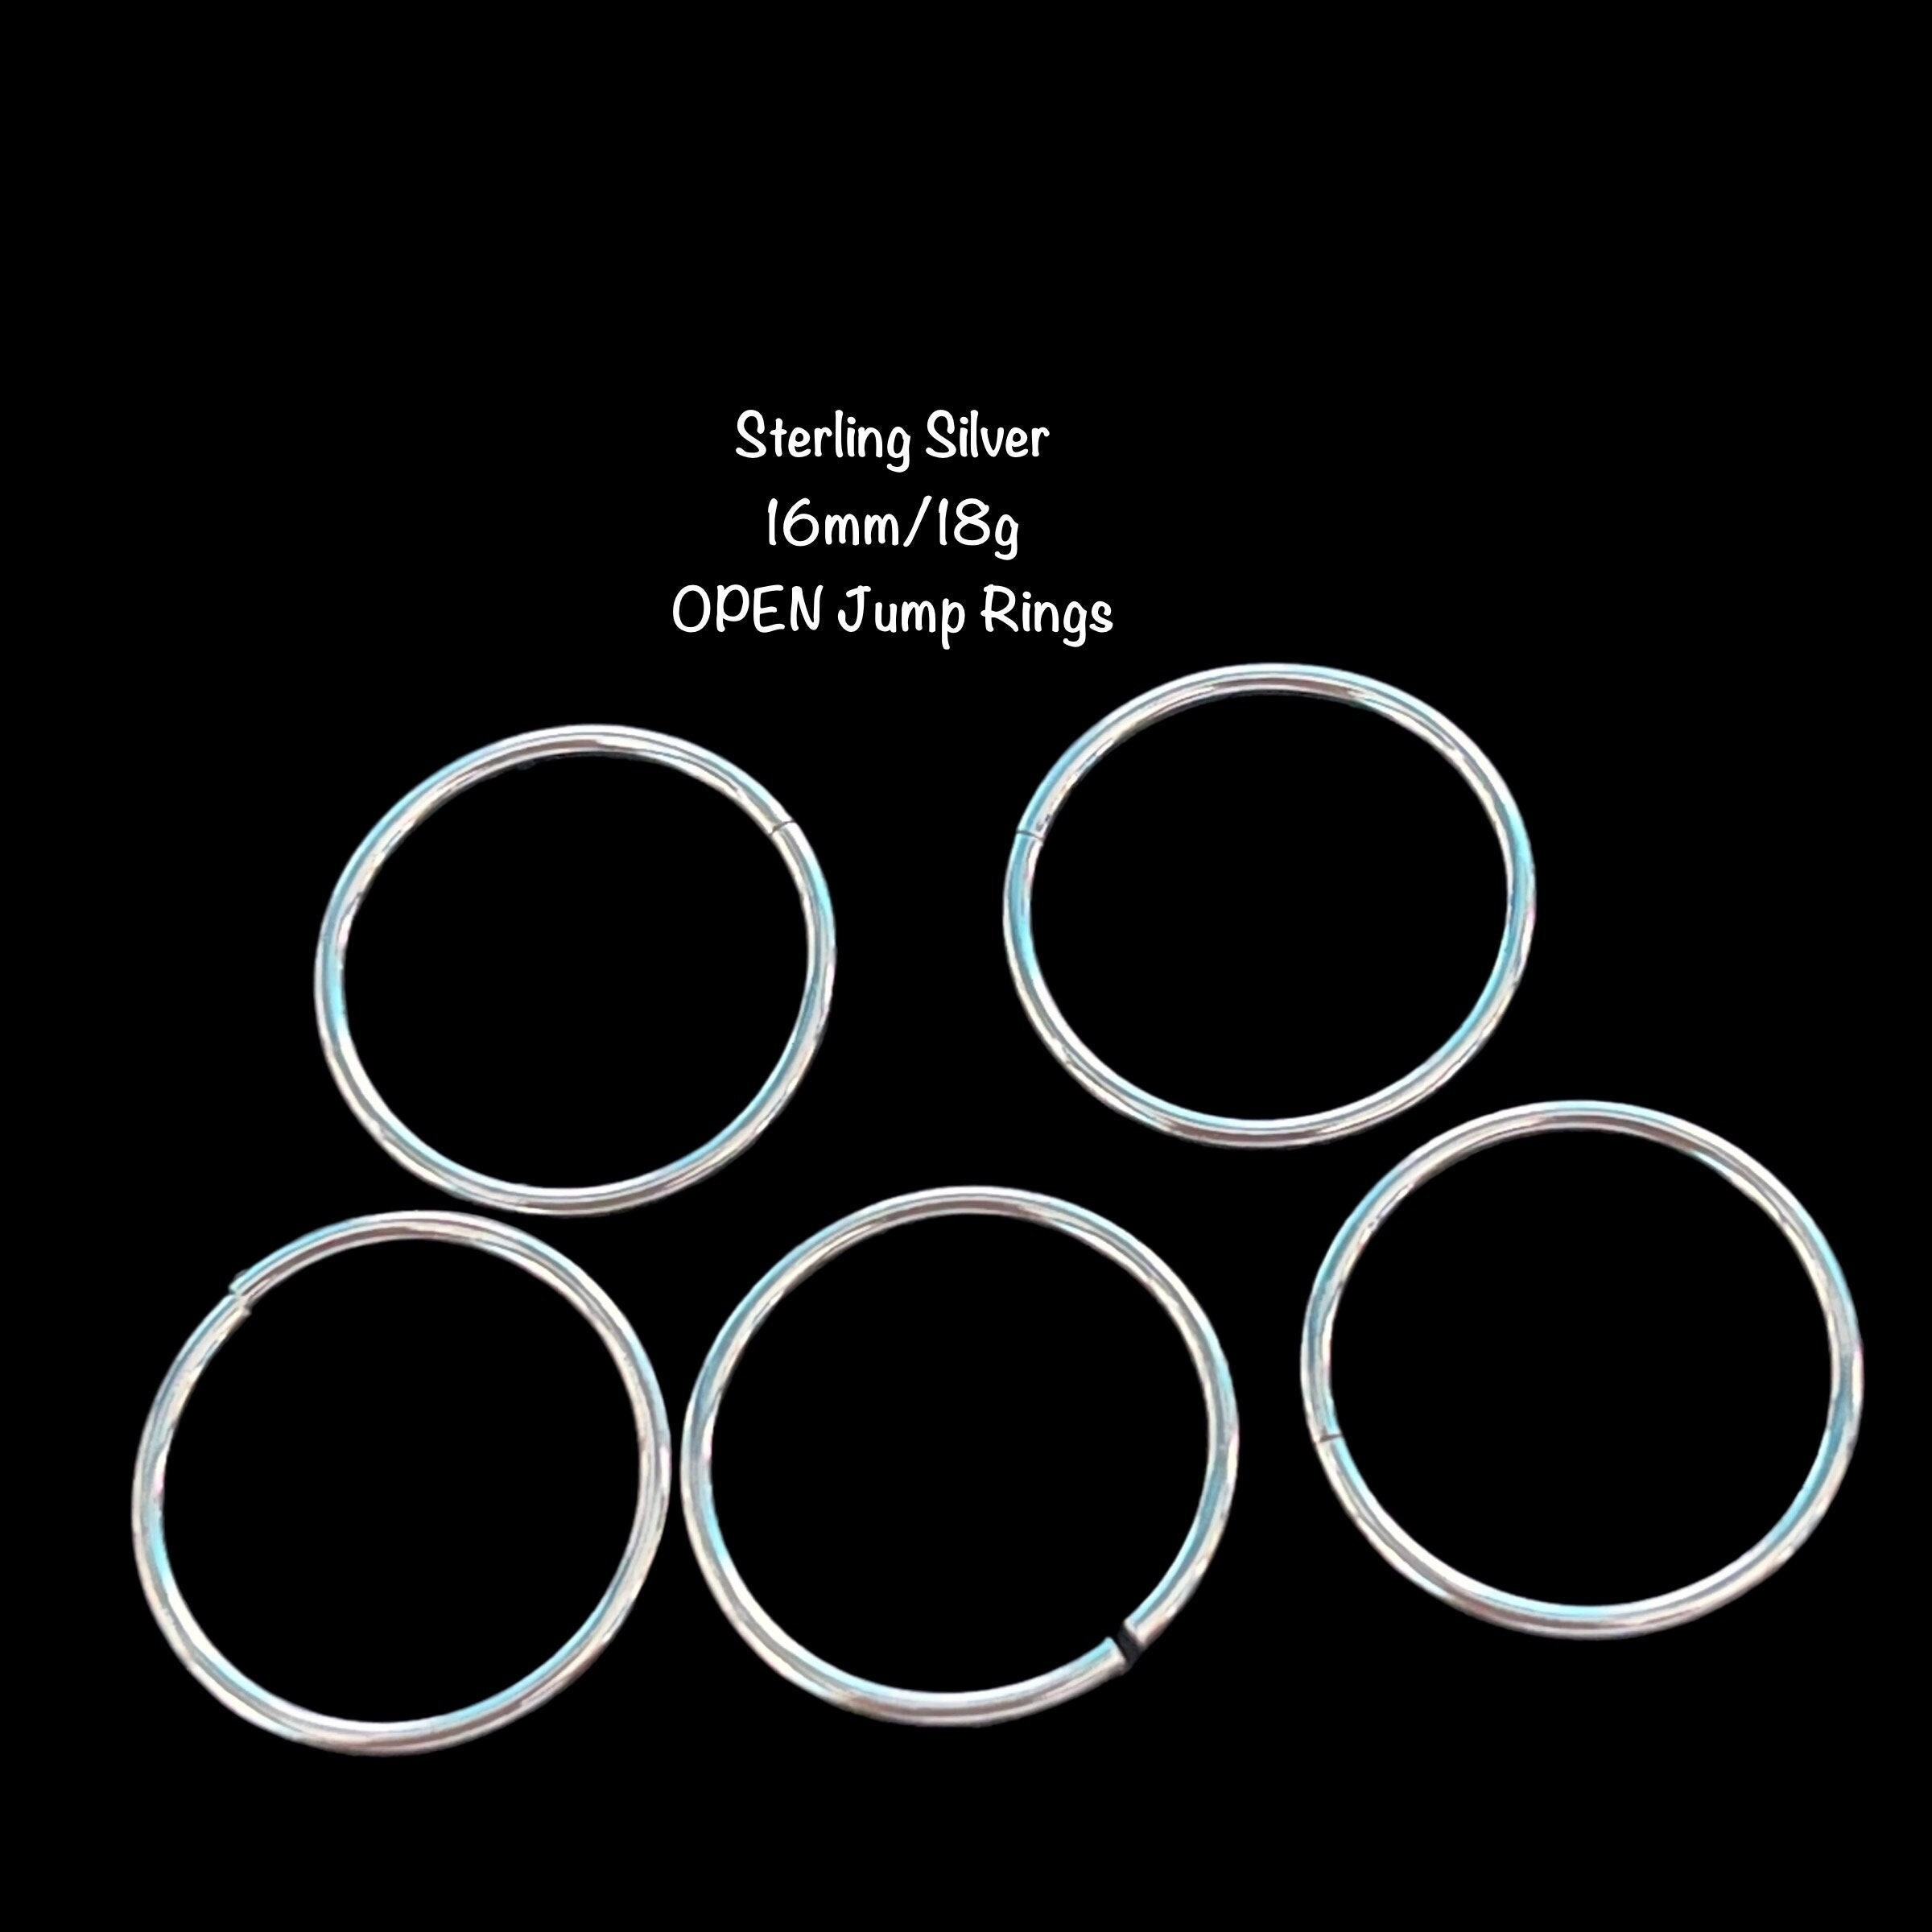 50 Square Sterling Silver Jump Rings - Bright, Antique or Black in